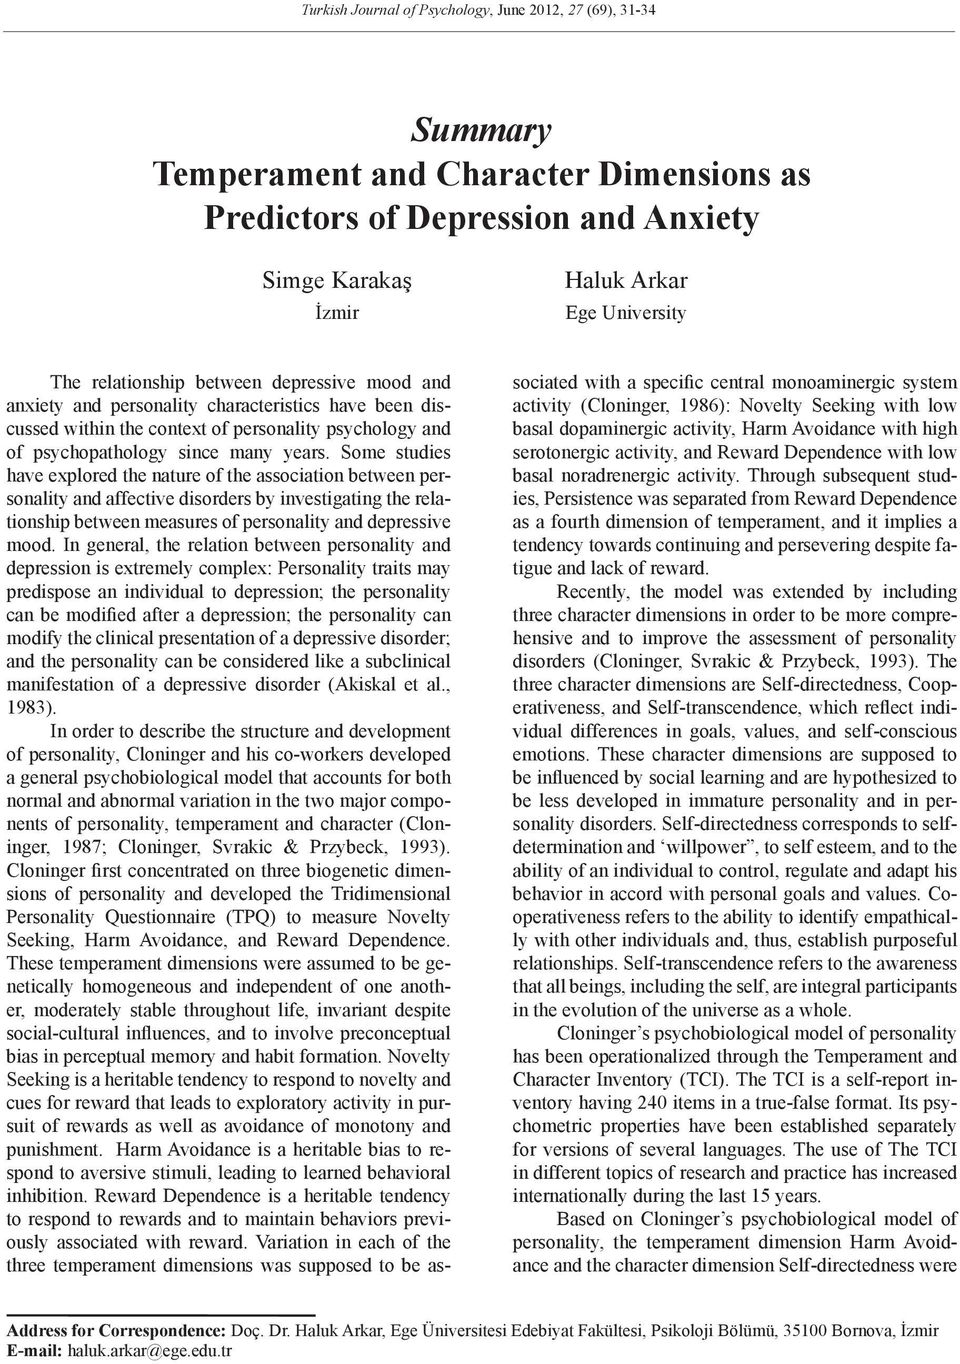 Some studies have explored the nature of the association between personality and affective disorders by investigating the relationship between measures of personality and depressive mood.